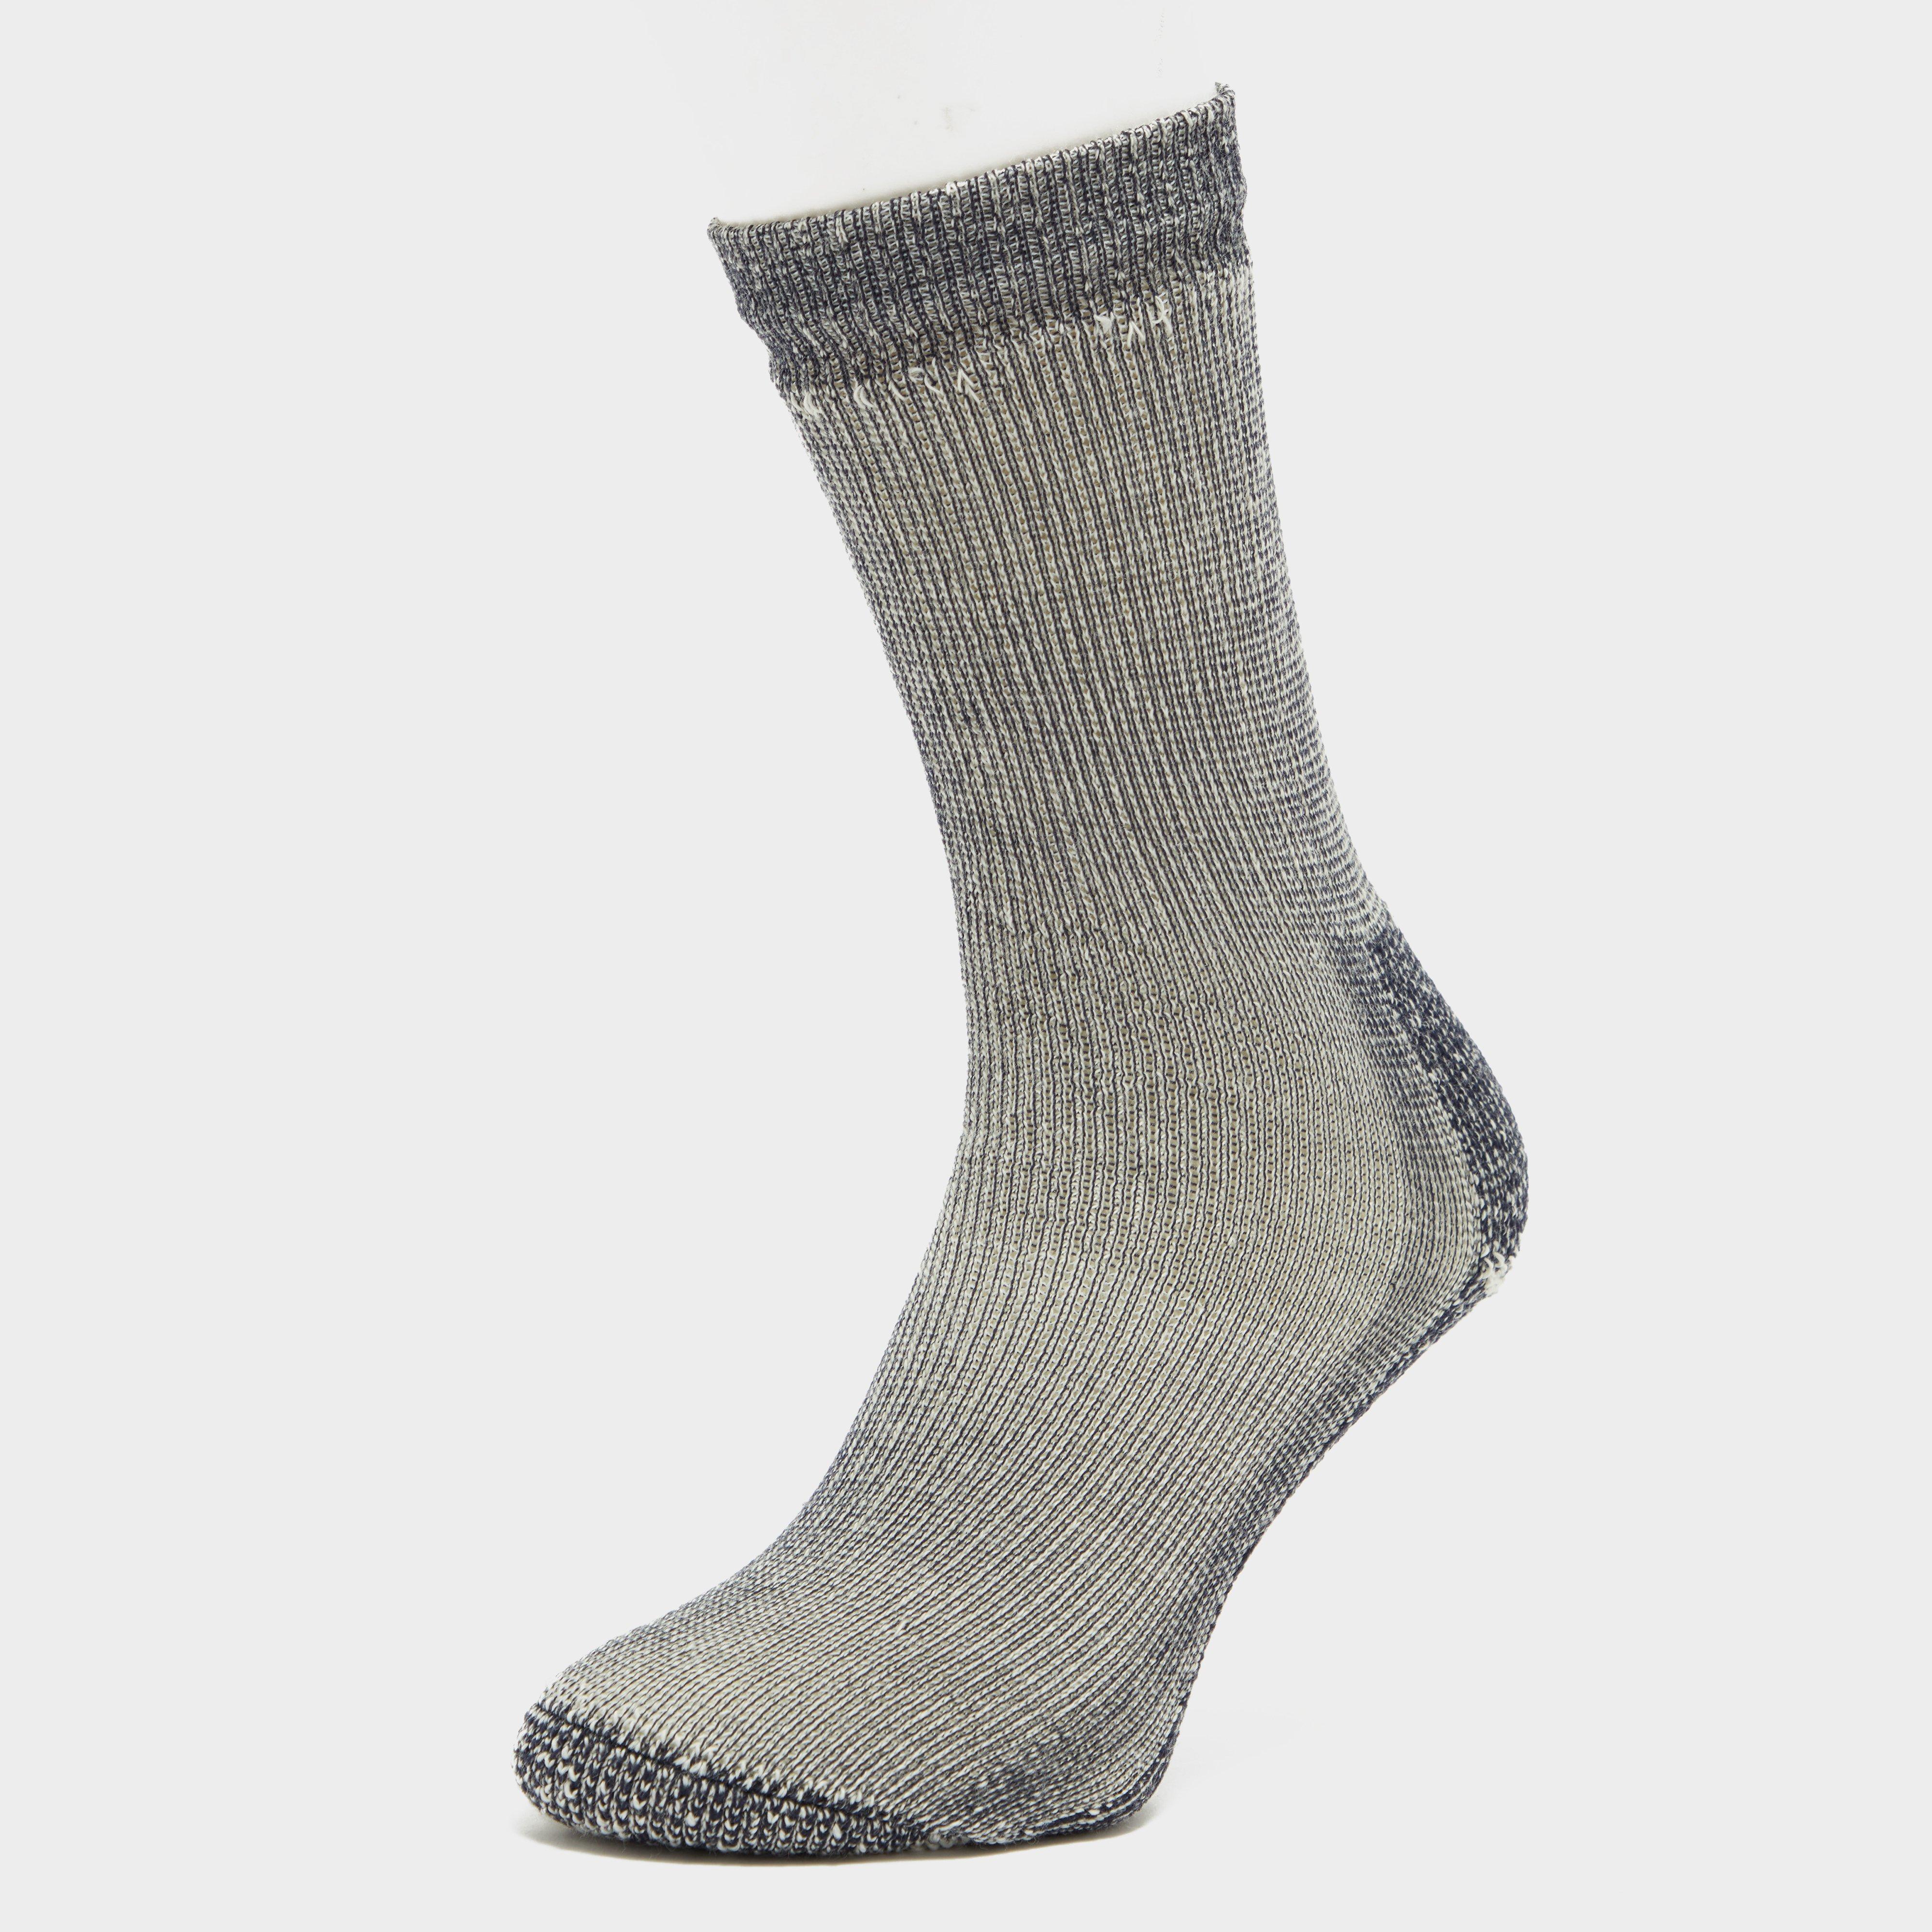 Smartwool Hike Classic Edition Extra Cushion Crew Socks - Navy Blue/navy Blue  Navy Blue/navy Blue